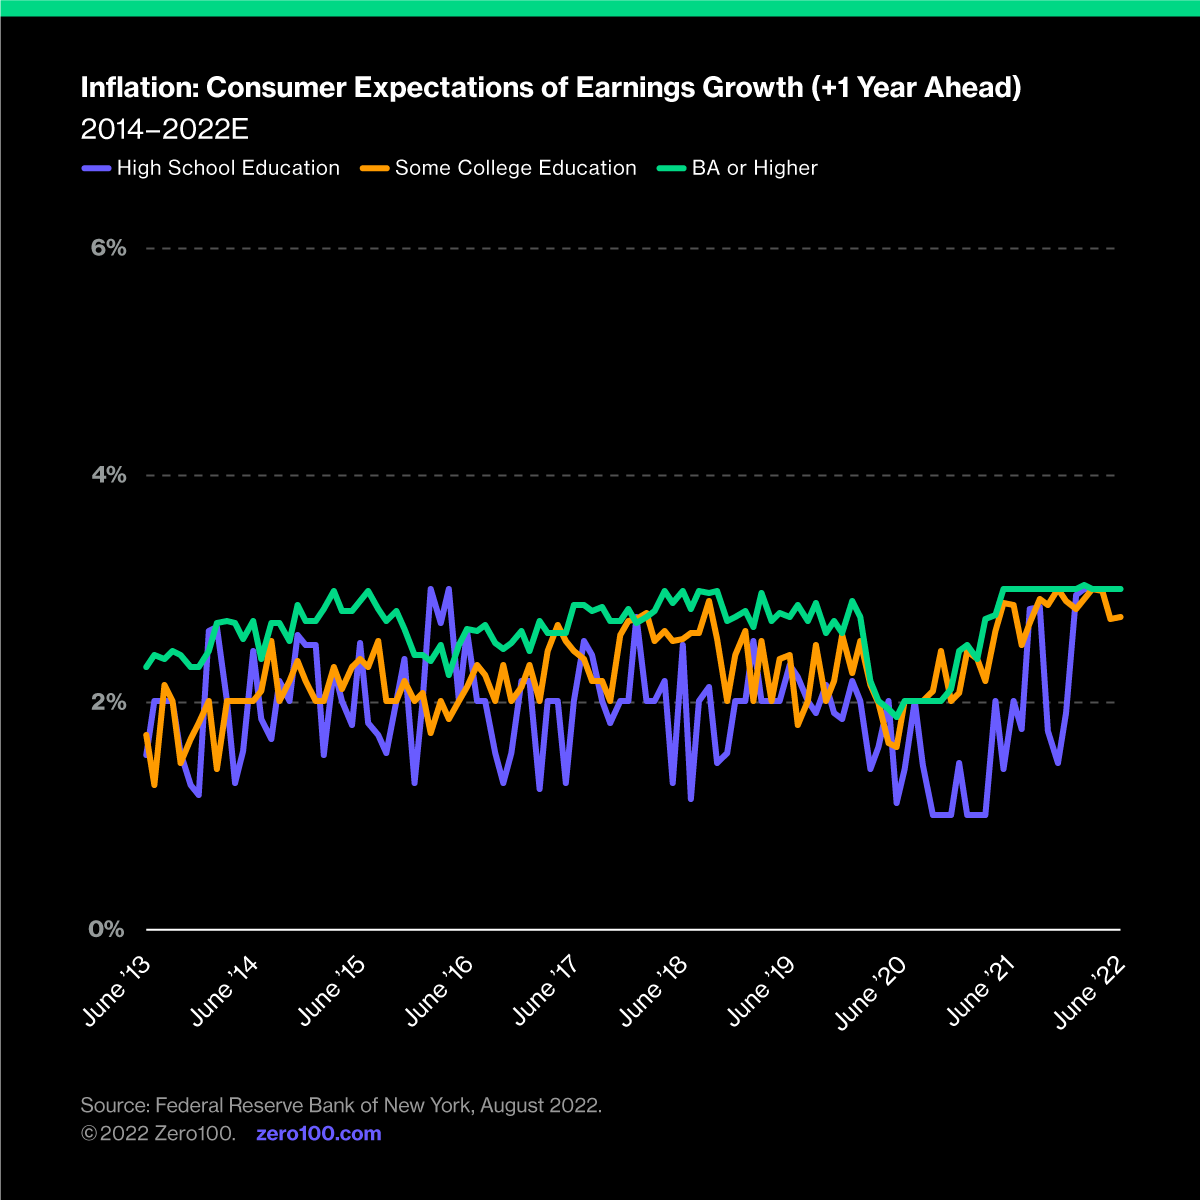 Graph depicting consumer expectation of earnings growth for consumers with high school education, some college education, and BA or higher from 2014 until 2022. Source: Federal Reserve Bank of New York, August 2022.